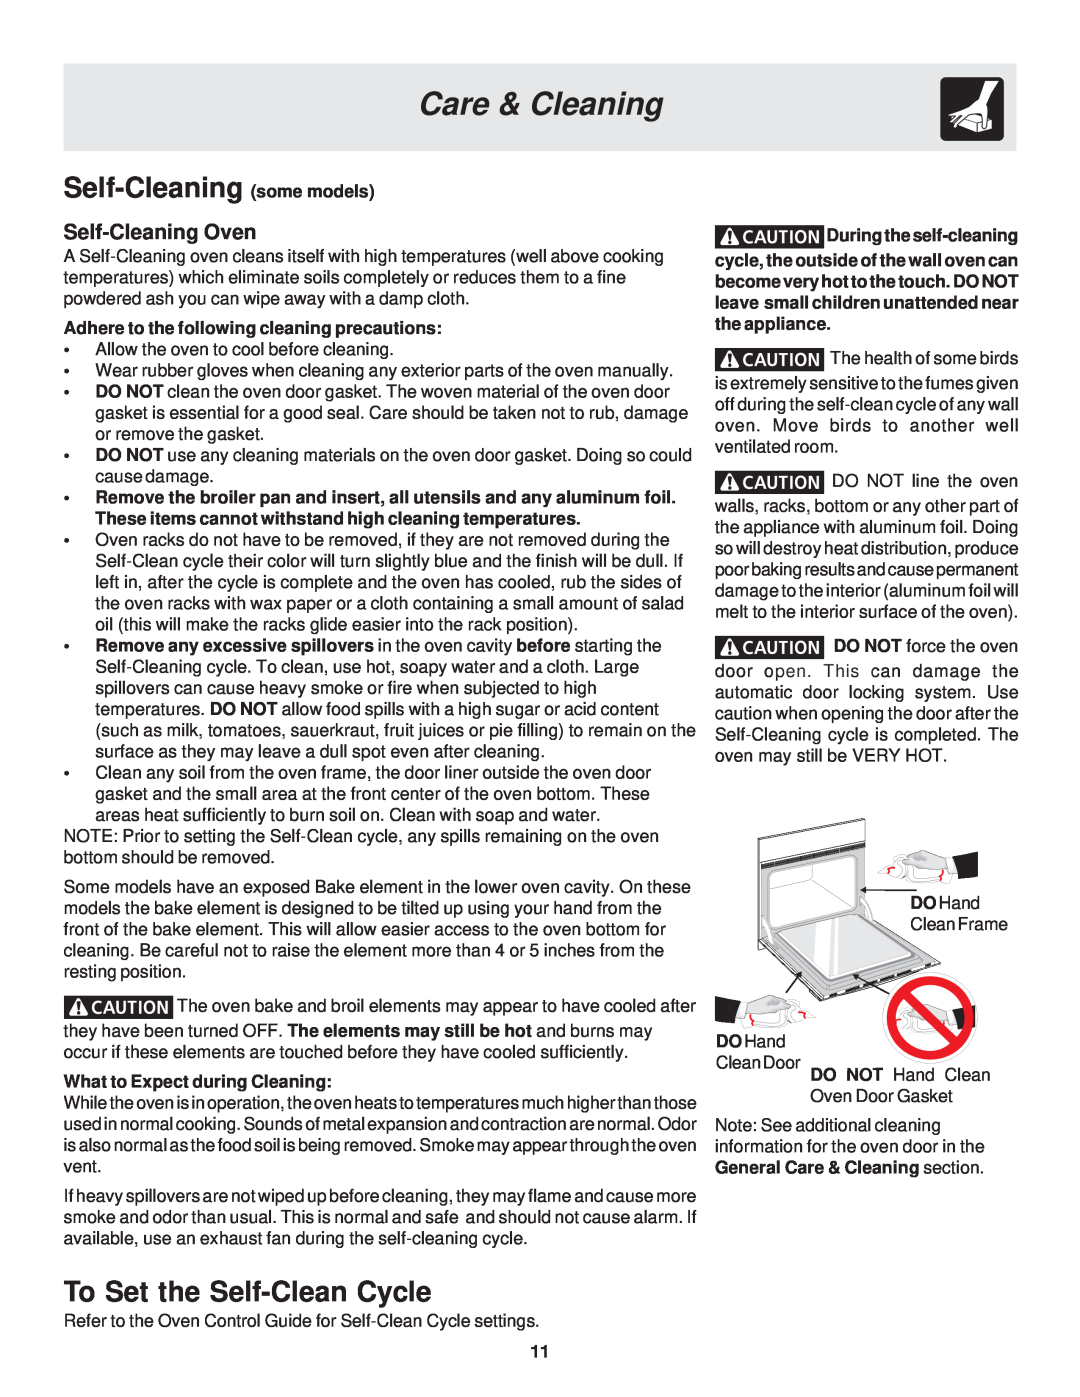 Frigidaire 318200929 warranty Self-Cleaning some models, To Set the Self-Clean Cycle, Care & Cleaning, Self-Cleaning Oven 